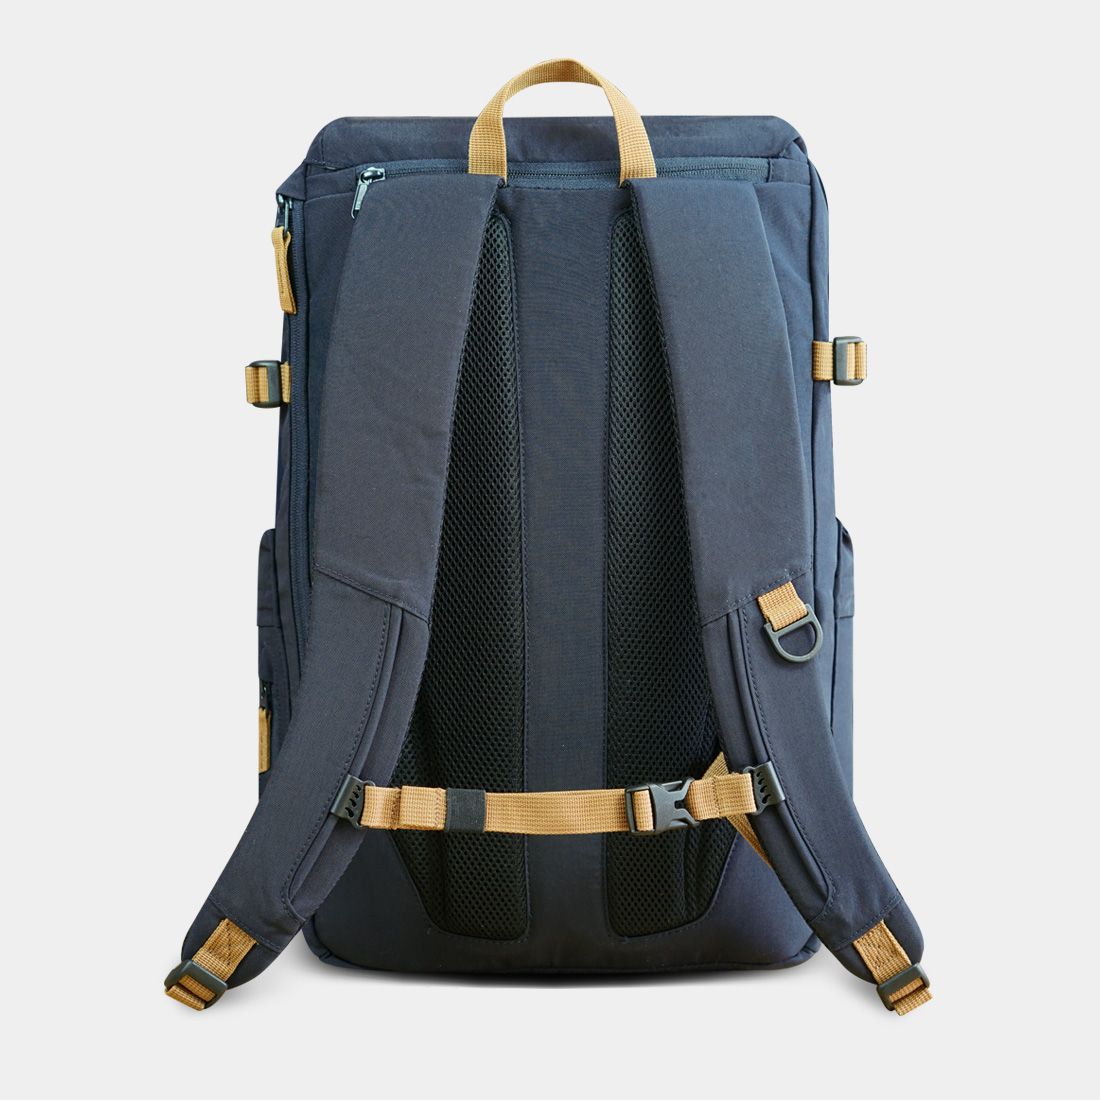 THE PACKER - SAC A DOS MULTI-UNIVERS